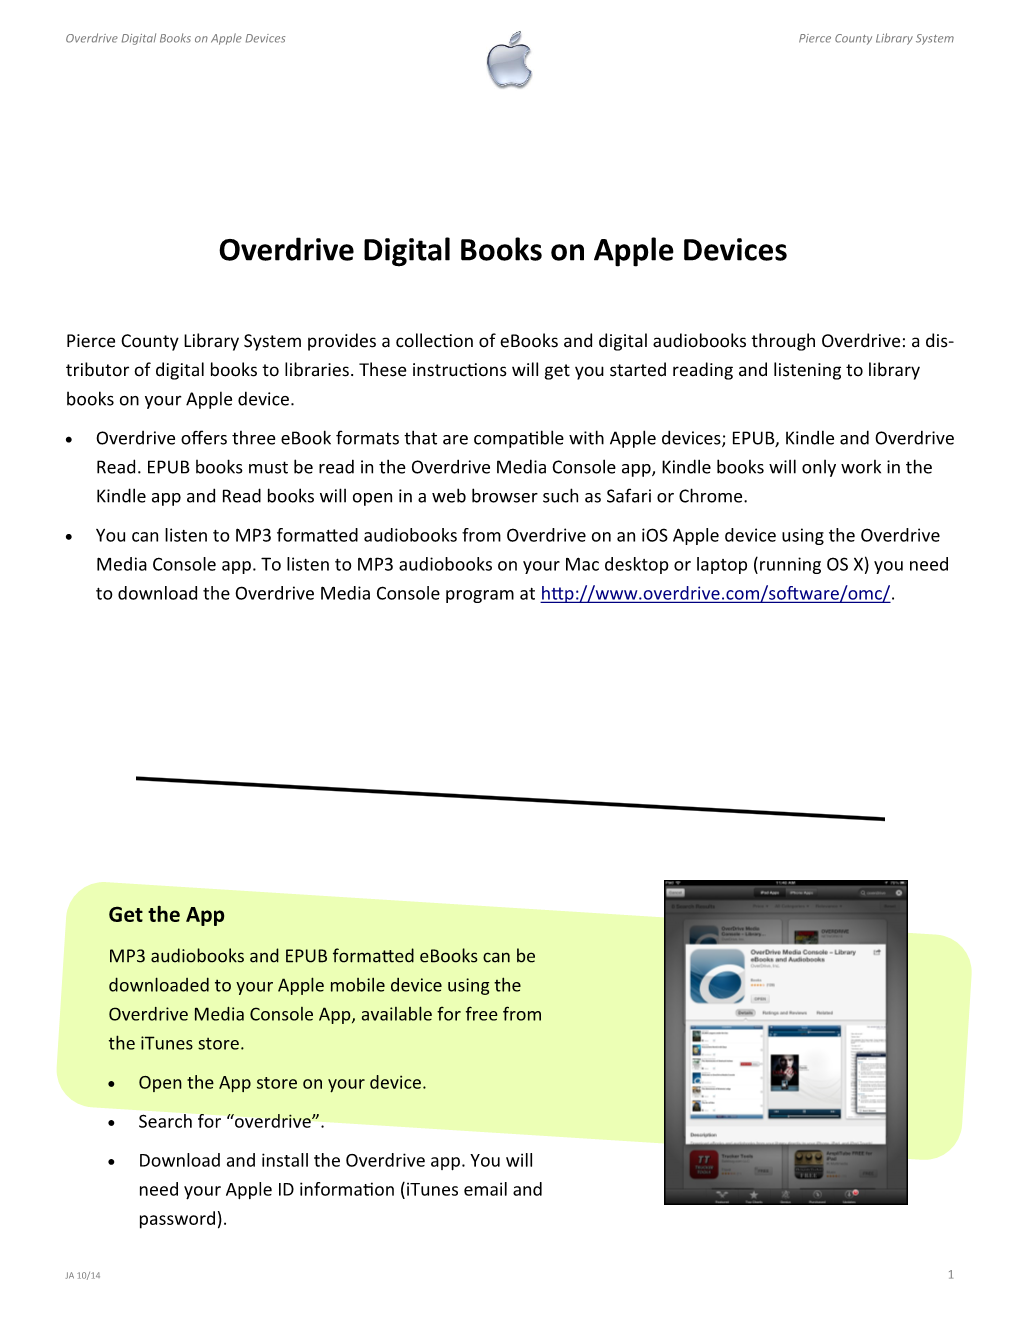 Overdrive Digital Books on Apple Devices Pierce County Library System